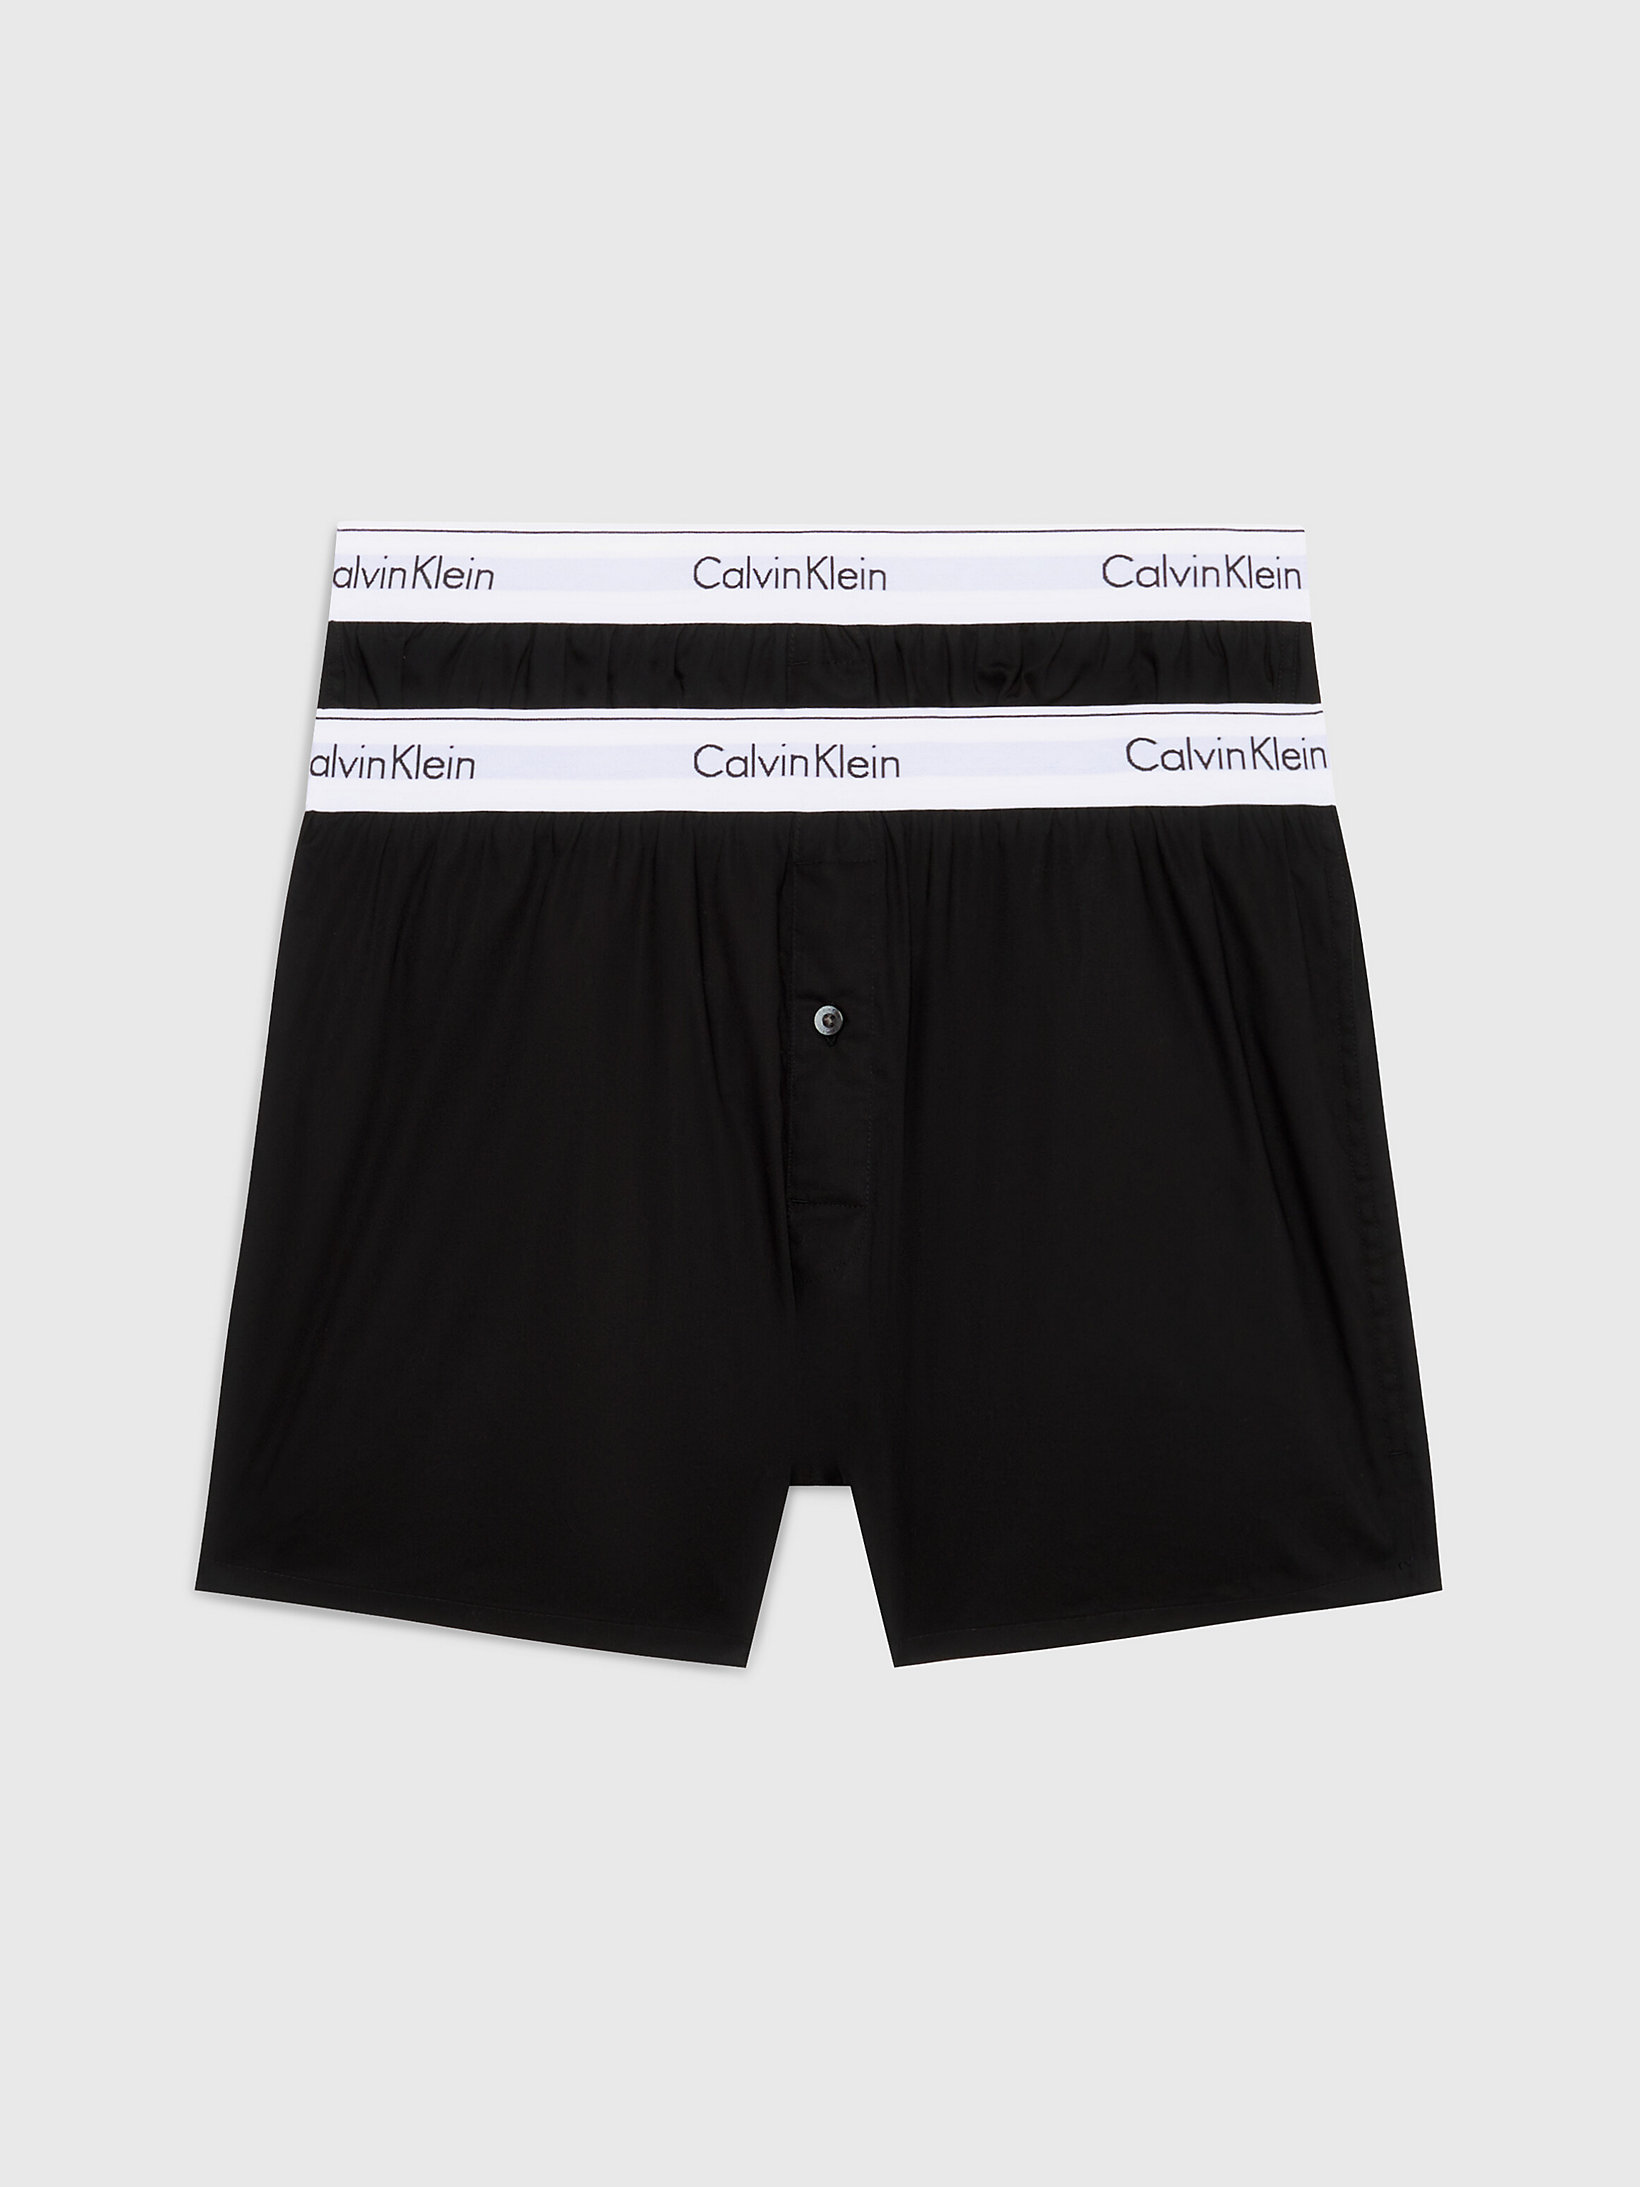 Calvin Klein Modern Cotton Slim-fit Boxer Shorts Pack Of Two for Men Mens Clothing Suits 